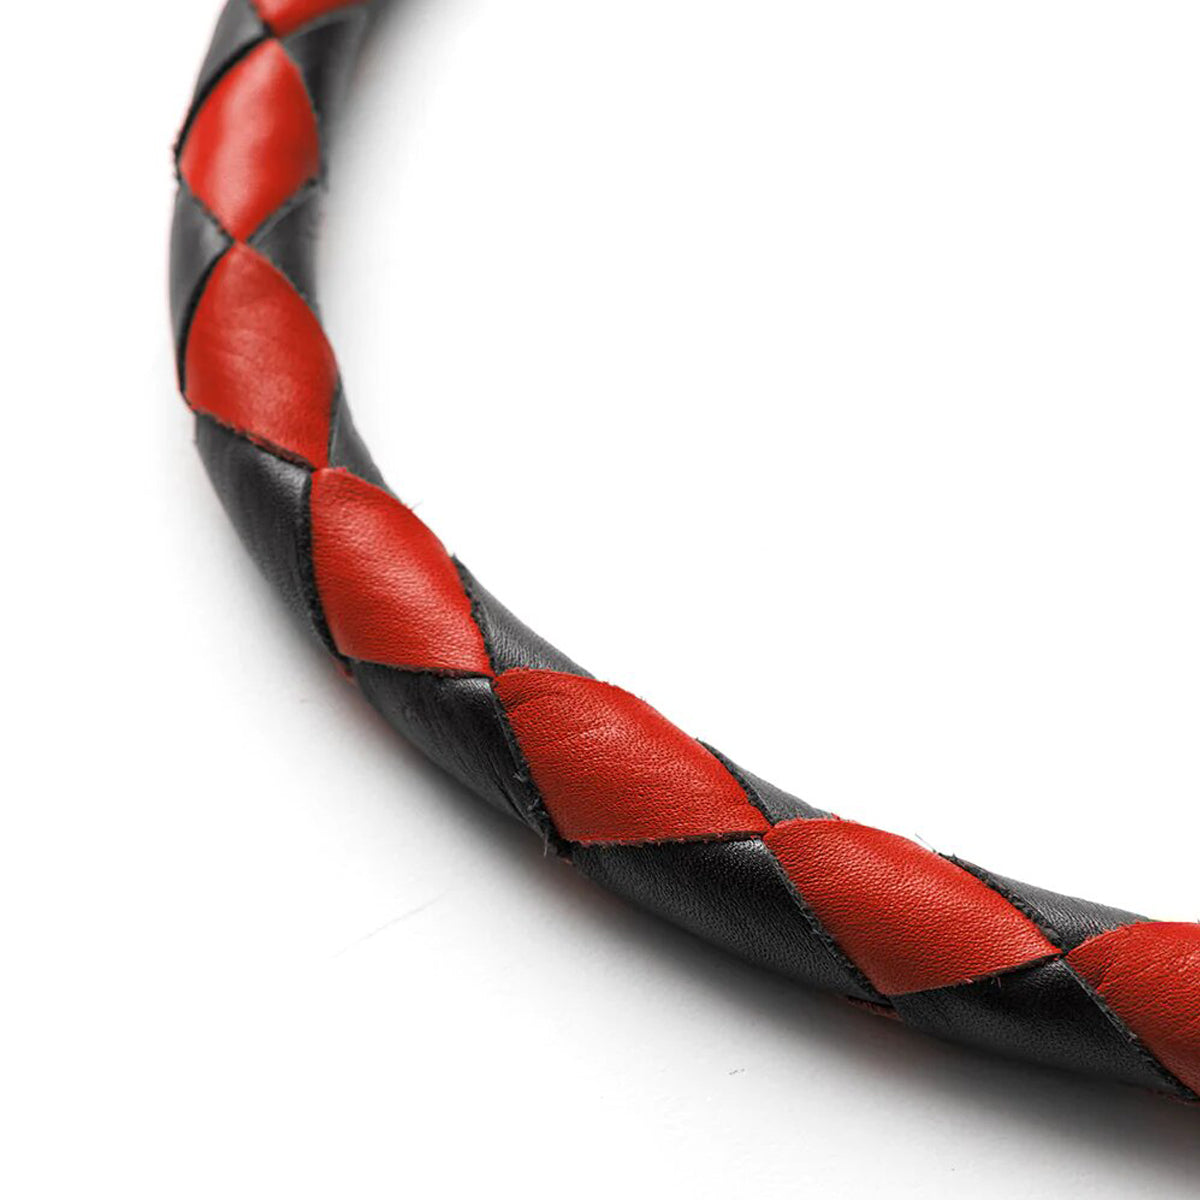 40 INCHES GET BACK WHIP IN BLACK & RED